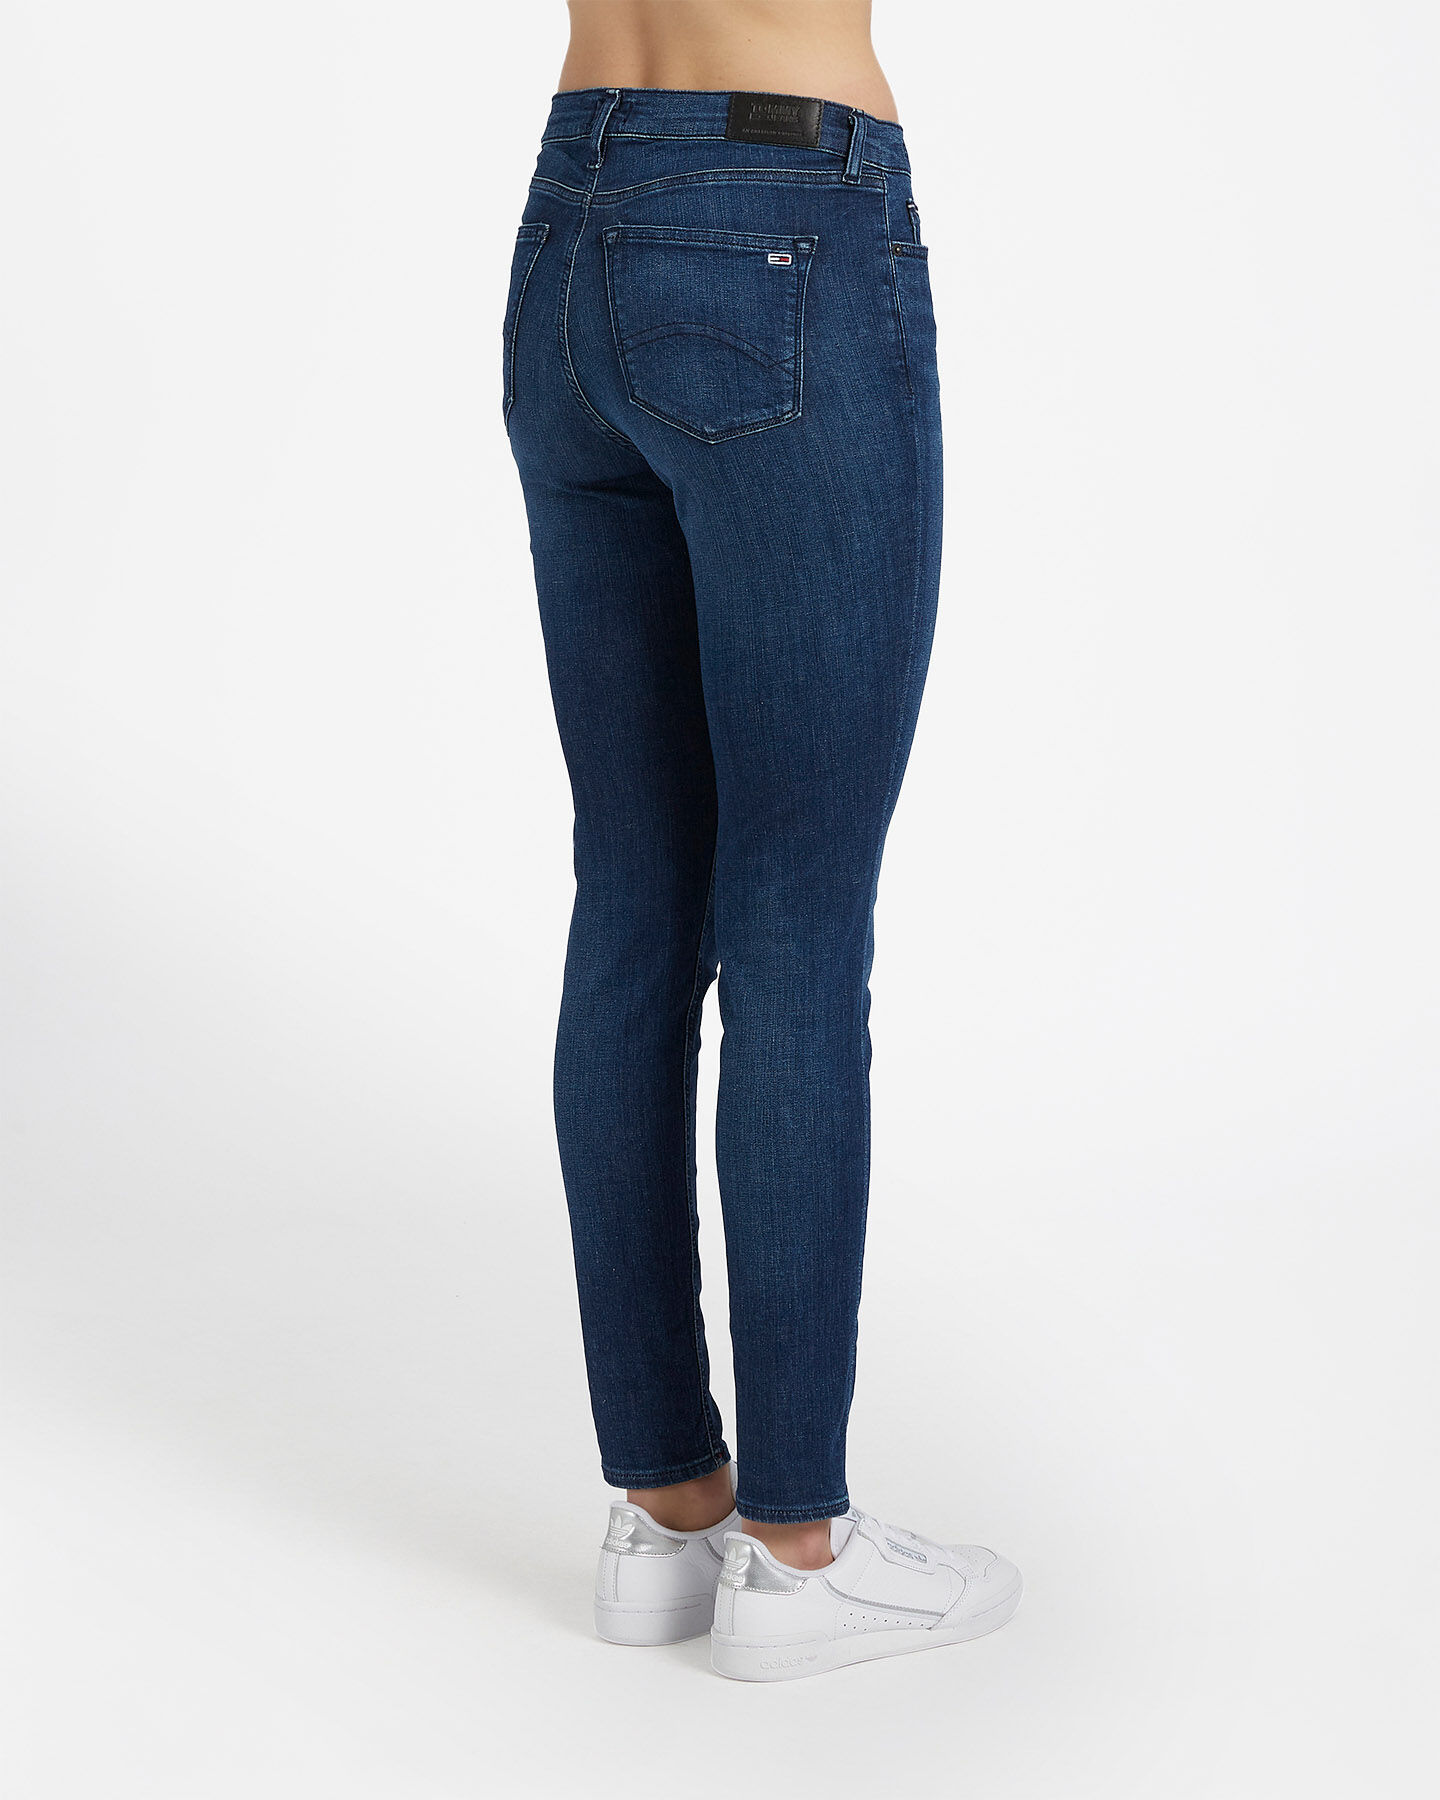  Jeans TOMMY HILFIGER NORA MID RISE SKINNY W S4073584|1BK|27 scatto 1